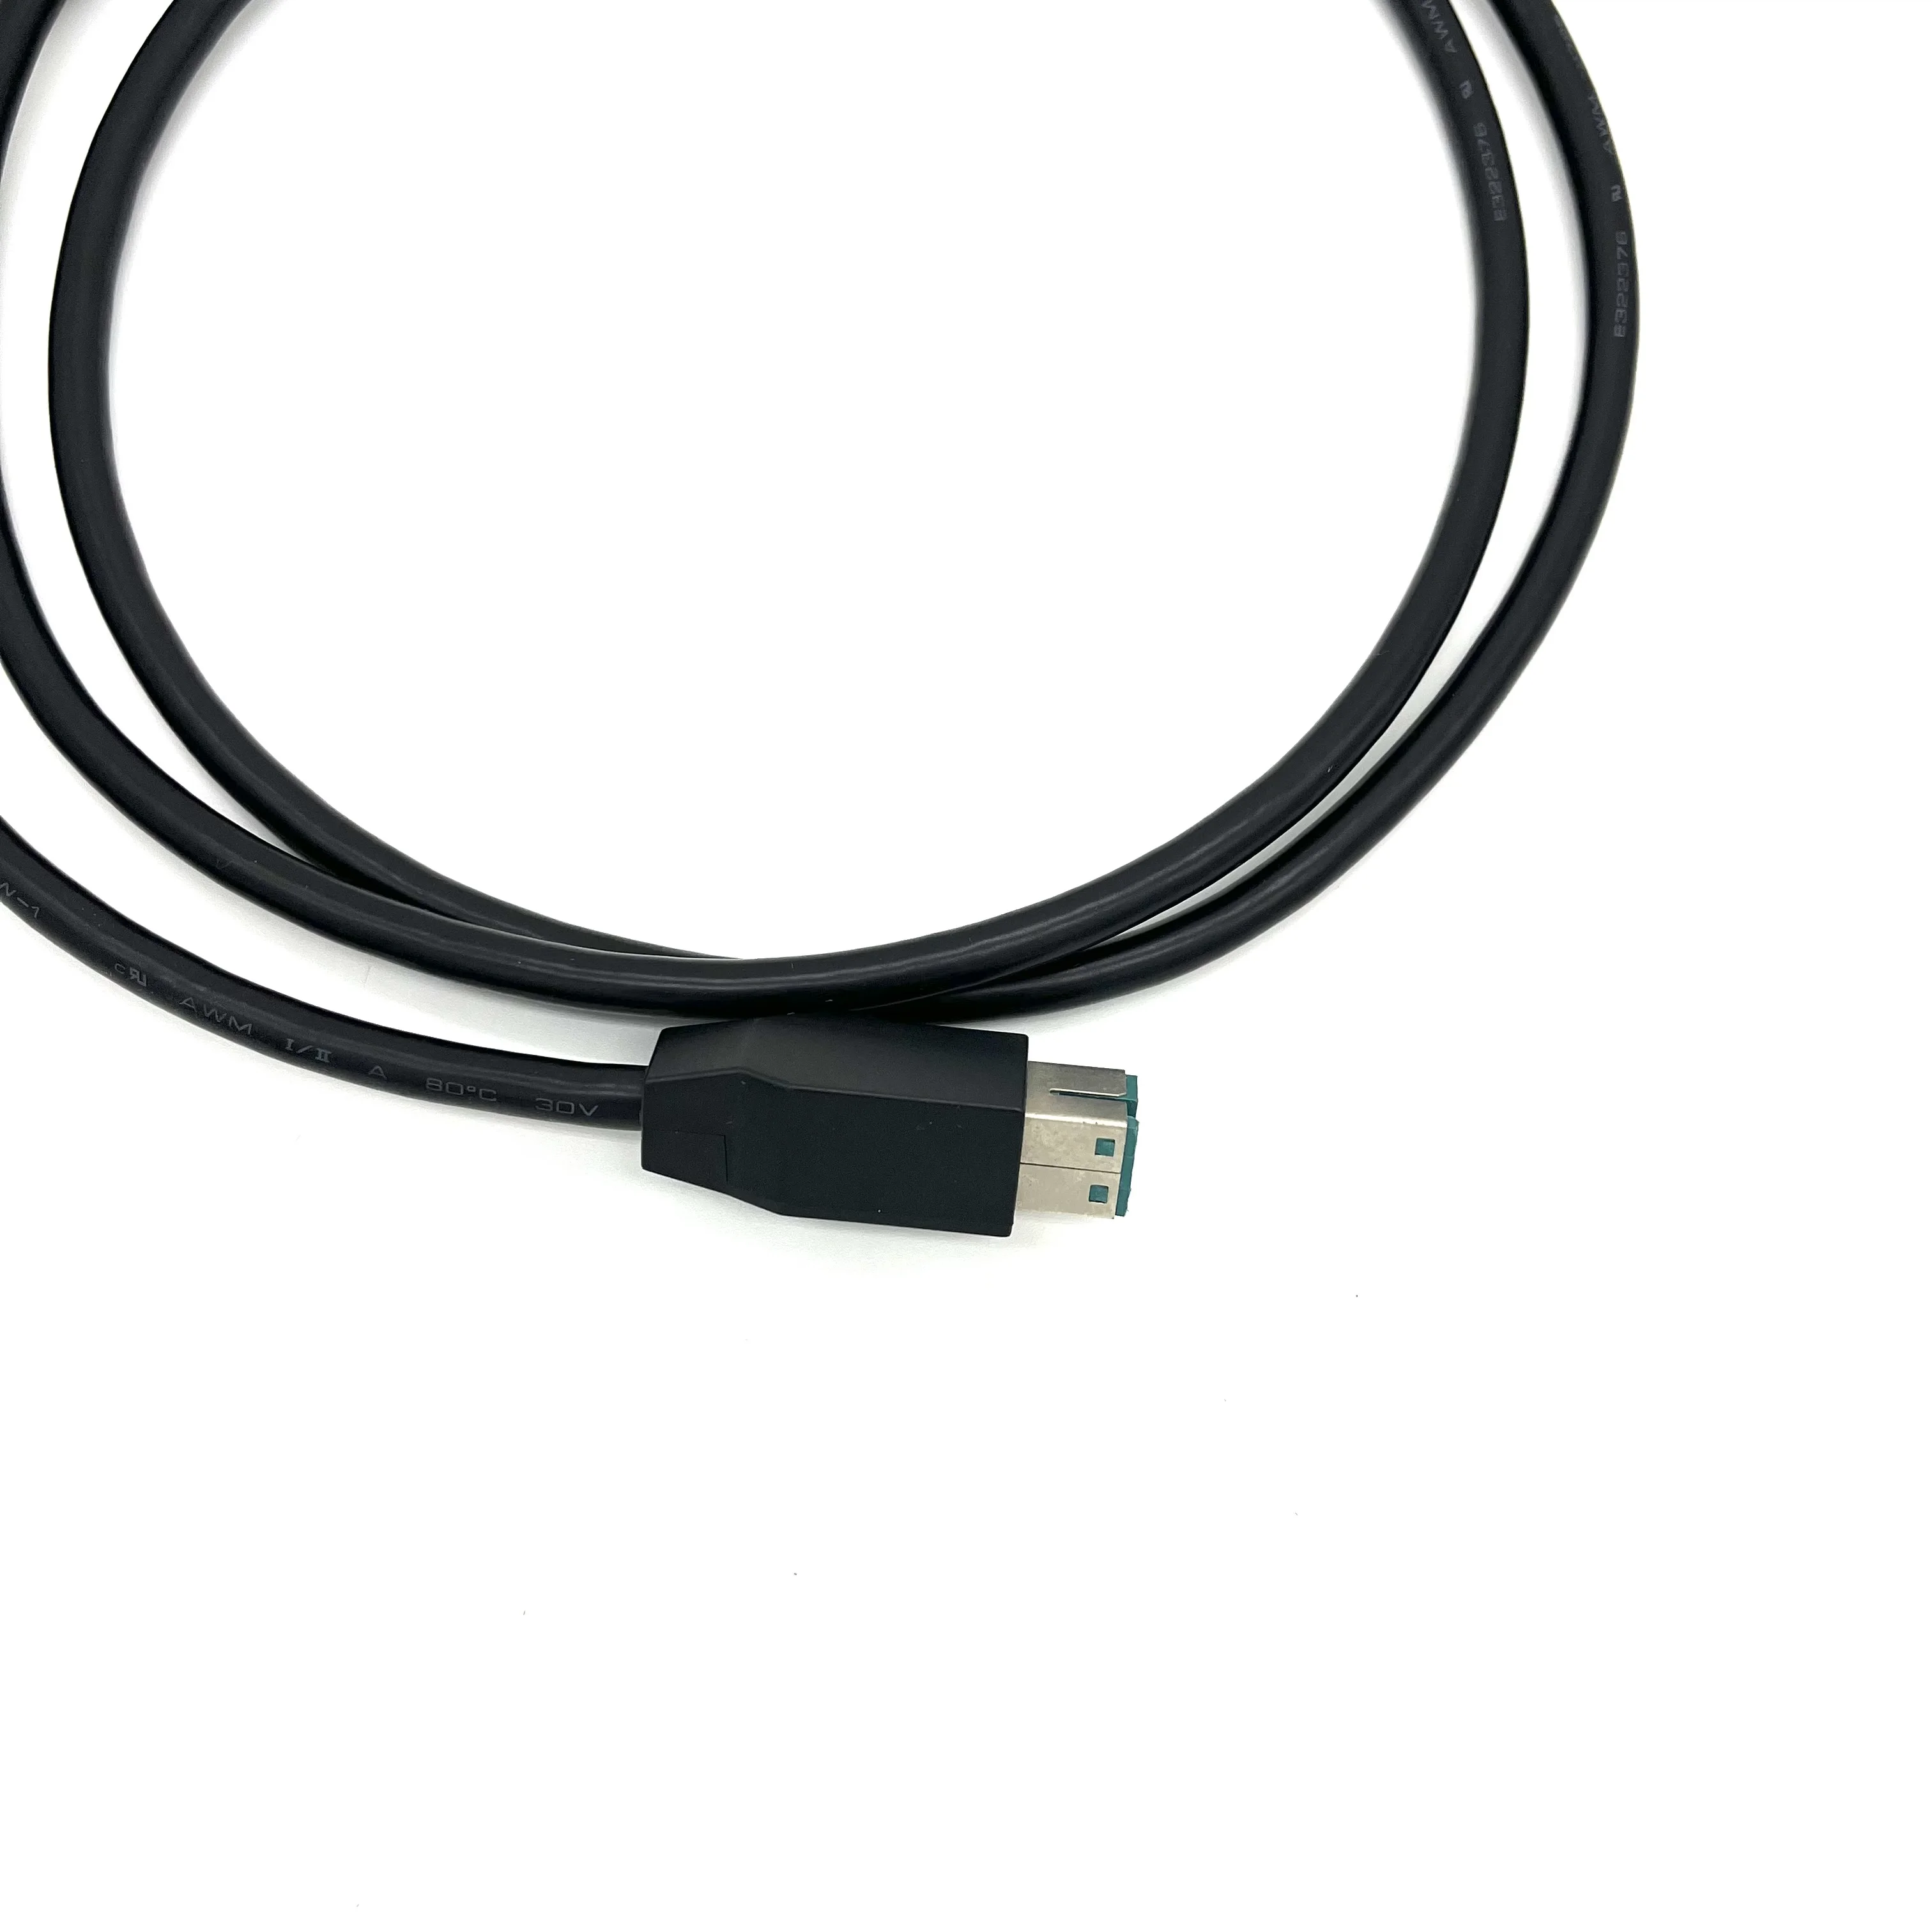 08531-02-r Vx810 Cable Usb A - Buy Vx810 Usb,Vfn 08531-02-r,Vx810 Cable Usb A Cable Rec on Alibaba.com